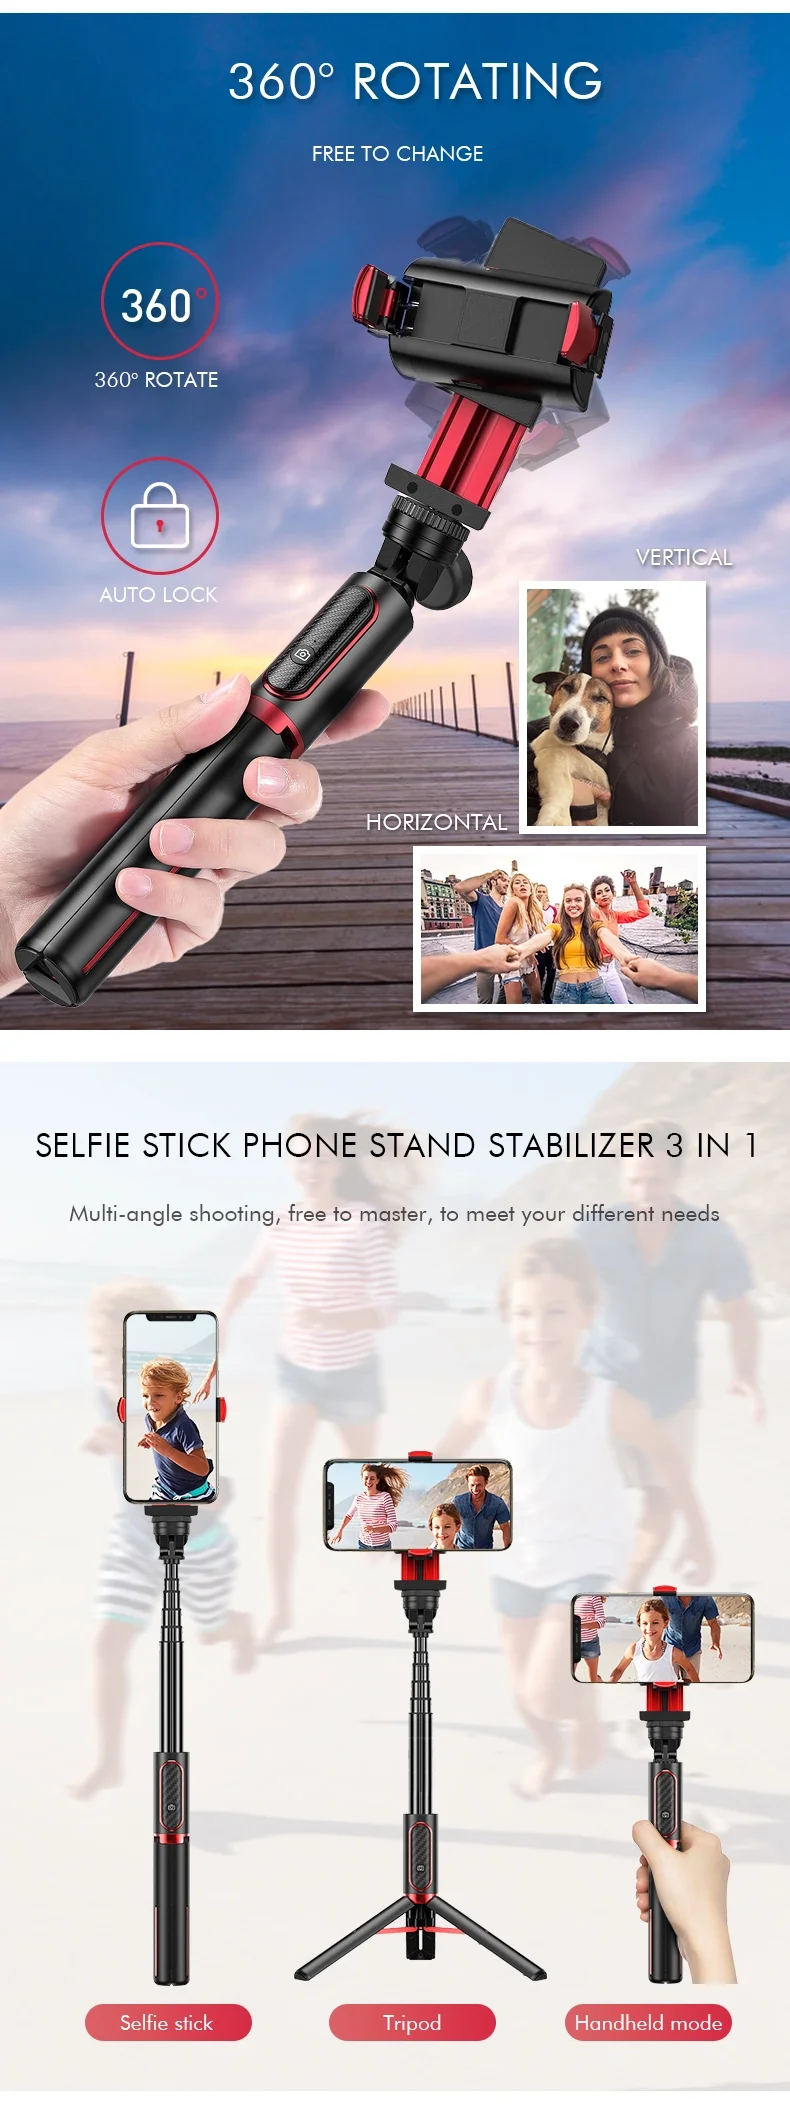 2020 Amazon Hot Selling 360 Rotating Tripod Stand Extendable Phone Selfie Handheld Gimbal Stabilizer